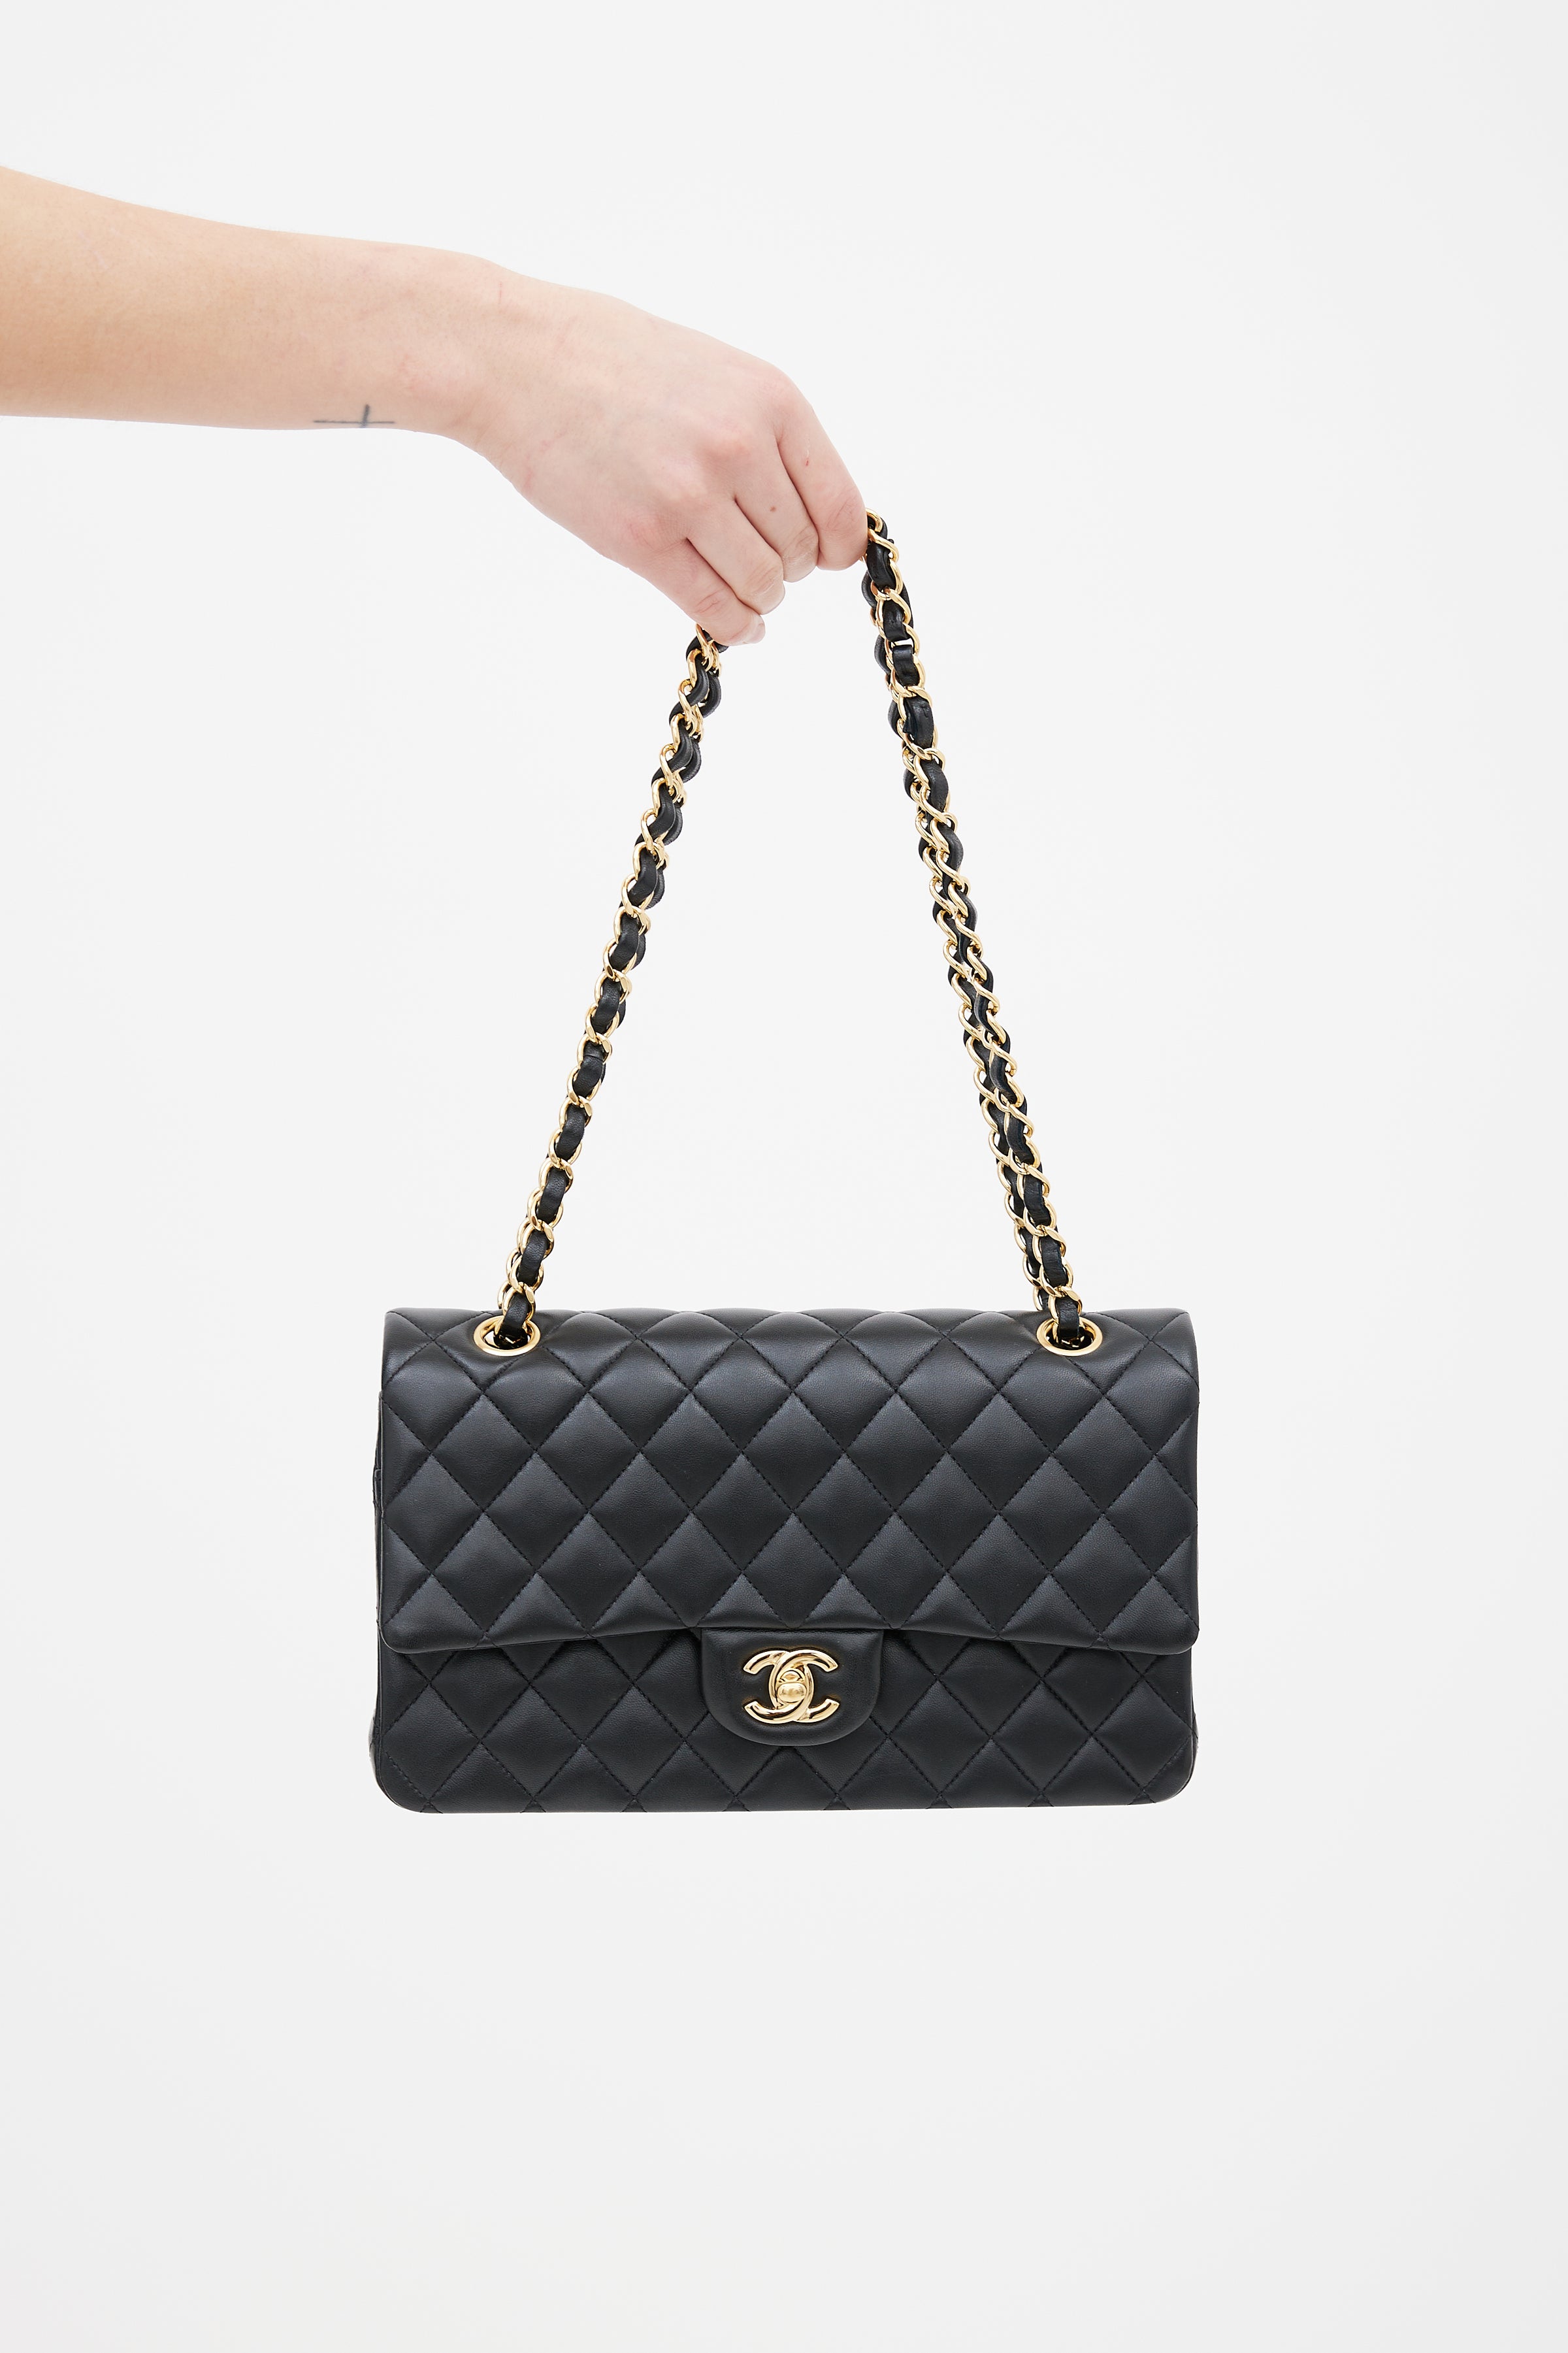 Chanel Black Quilted Lambskin Classic Maxi Single Flap Bag at Jill's  Consignment